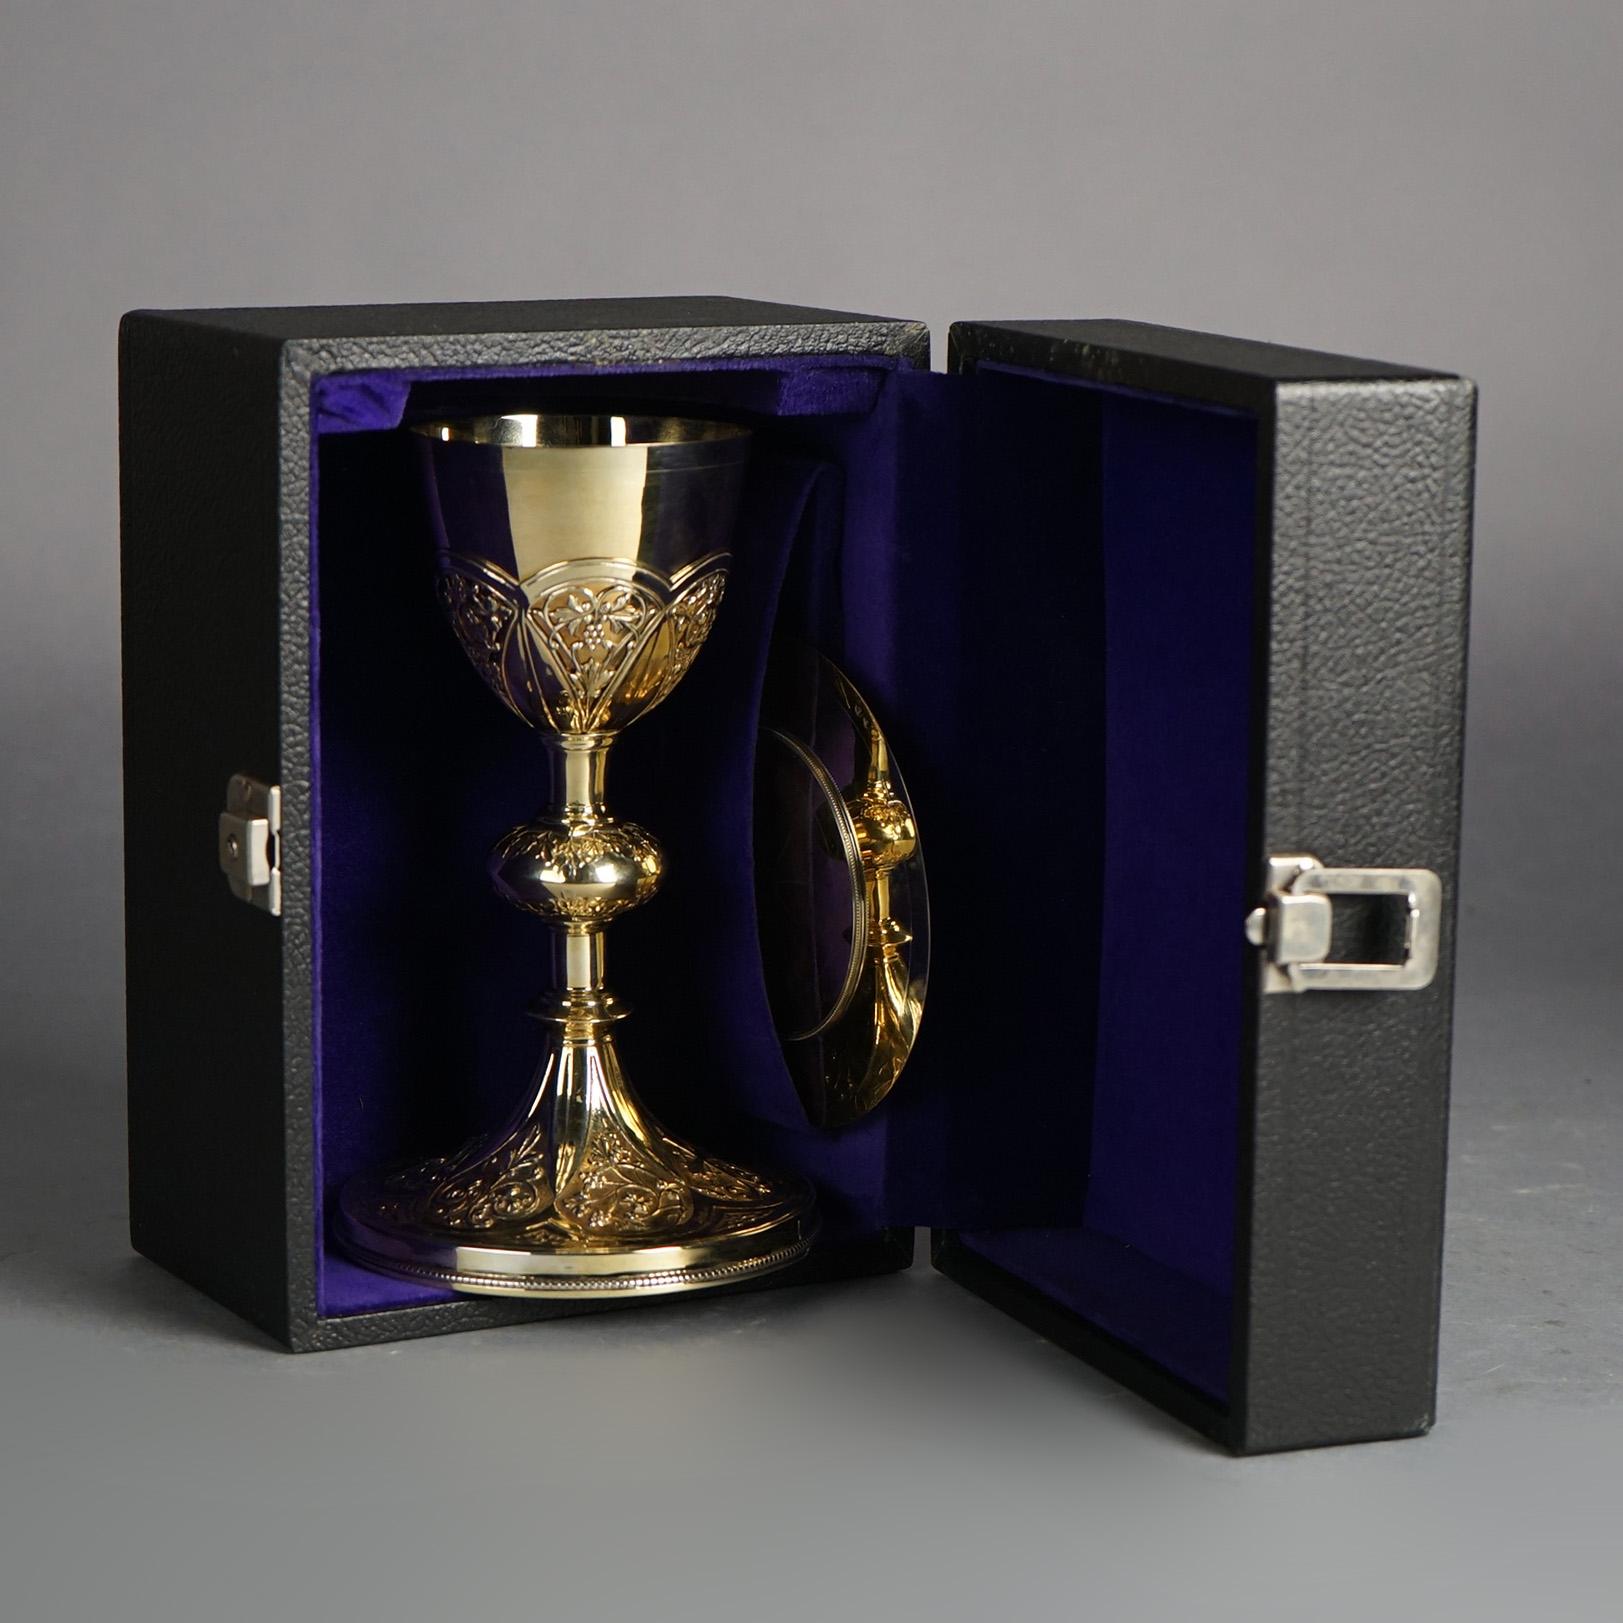 Gold Wash Floral Engraved Silver Religious Offering Chalice with Hallmark & Case For Sale 3